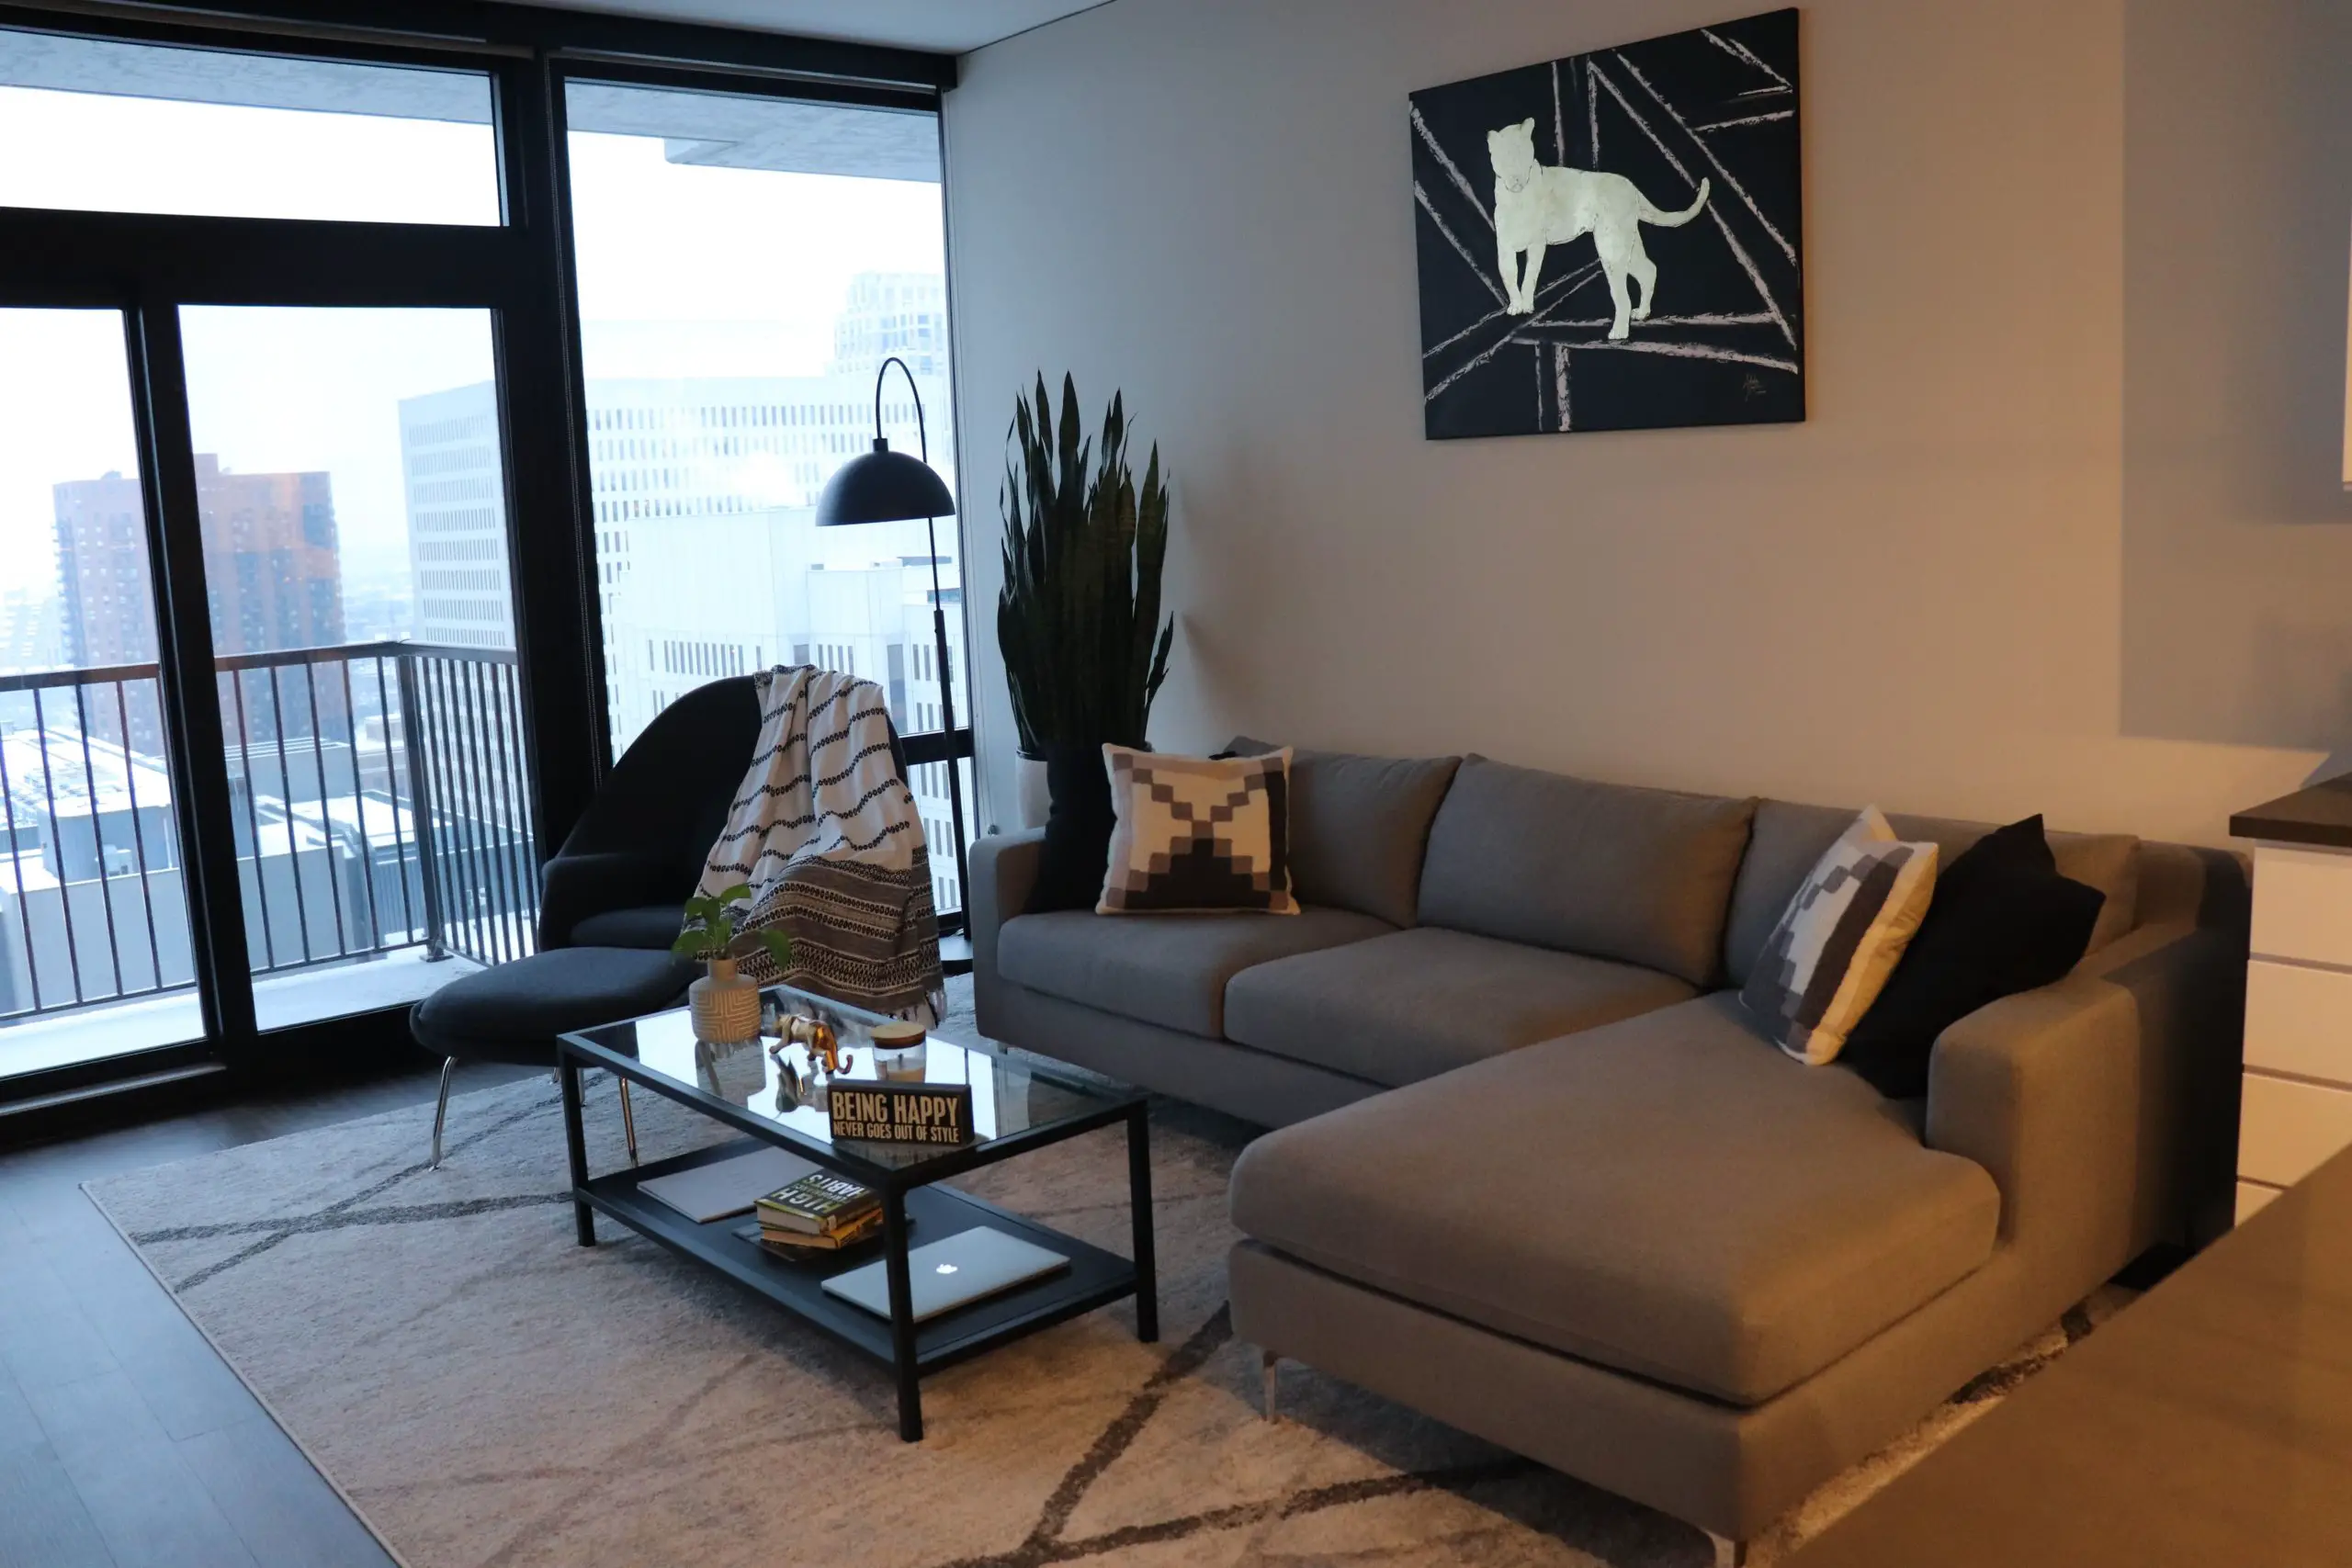 Womb Chair Gray Sectional Downtown Floor to Ceiling Windows